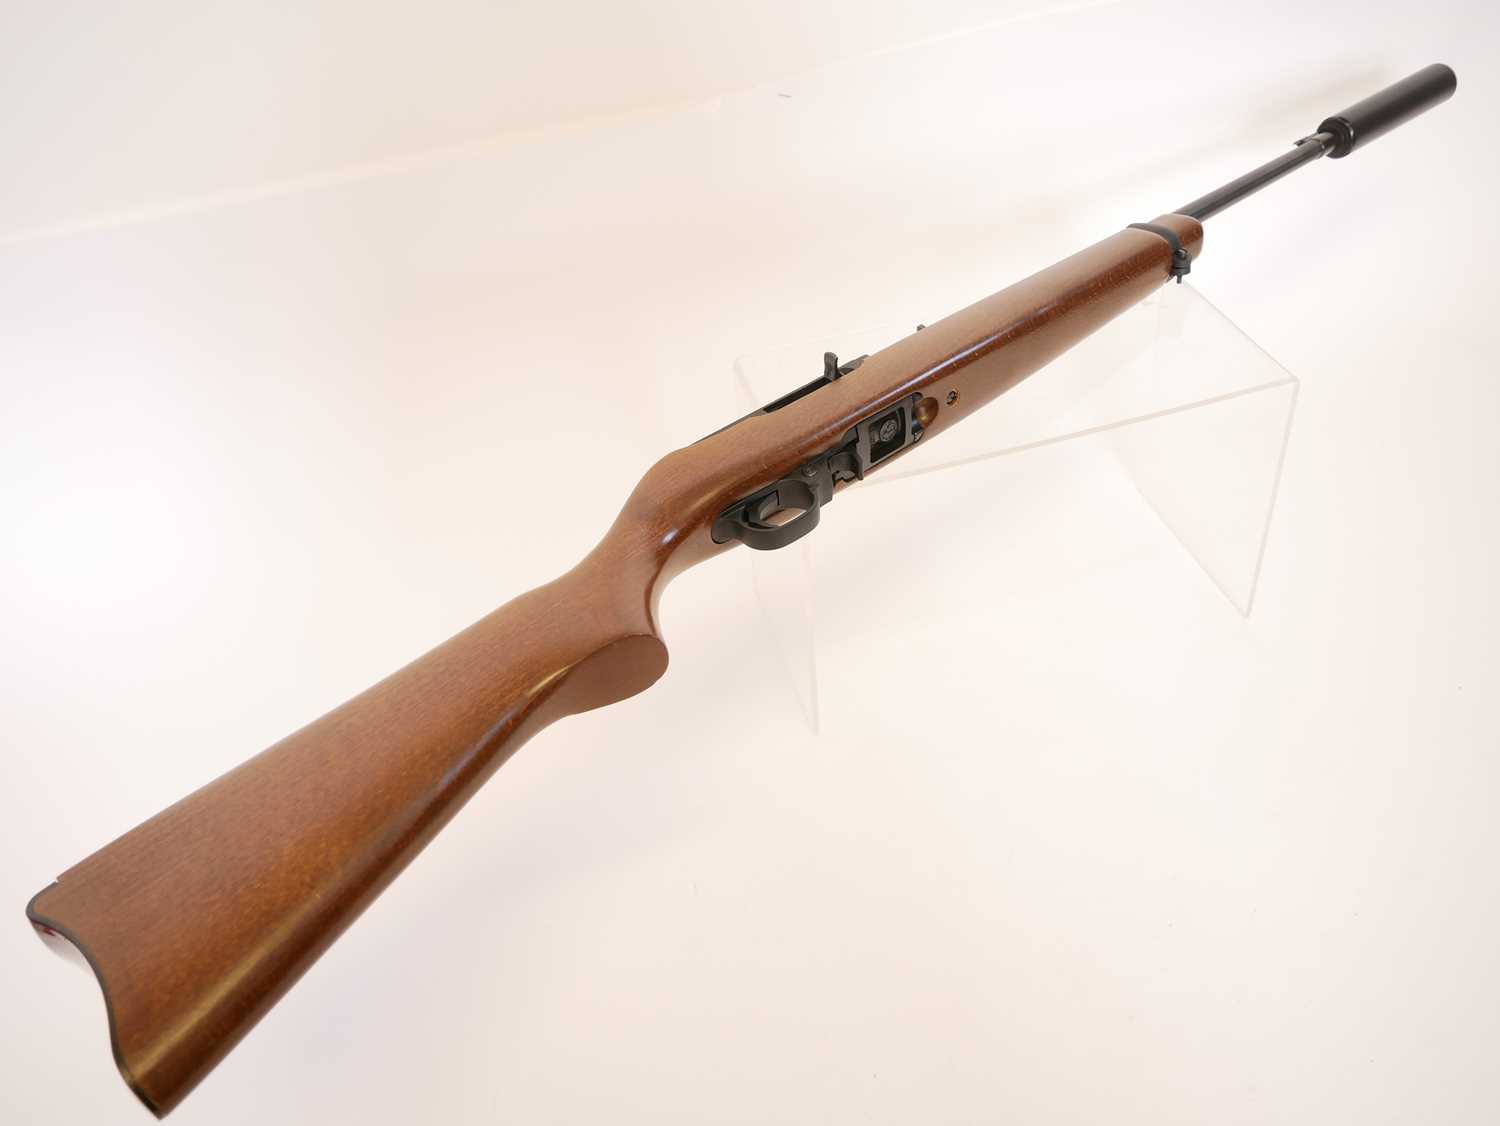 Ruger 10-22 .22lr semi auto rifle and moderator, serial number 356-73813, 16.5inch barrel fitted - Image 7 of 11